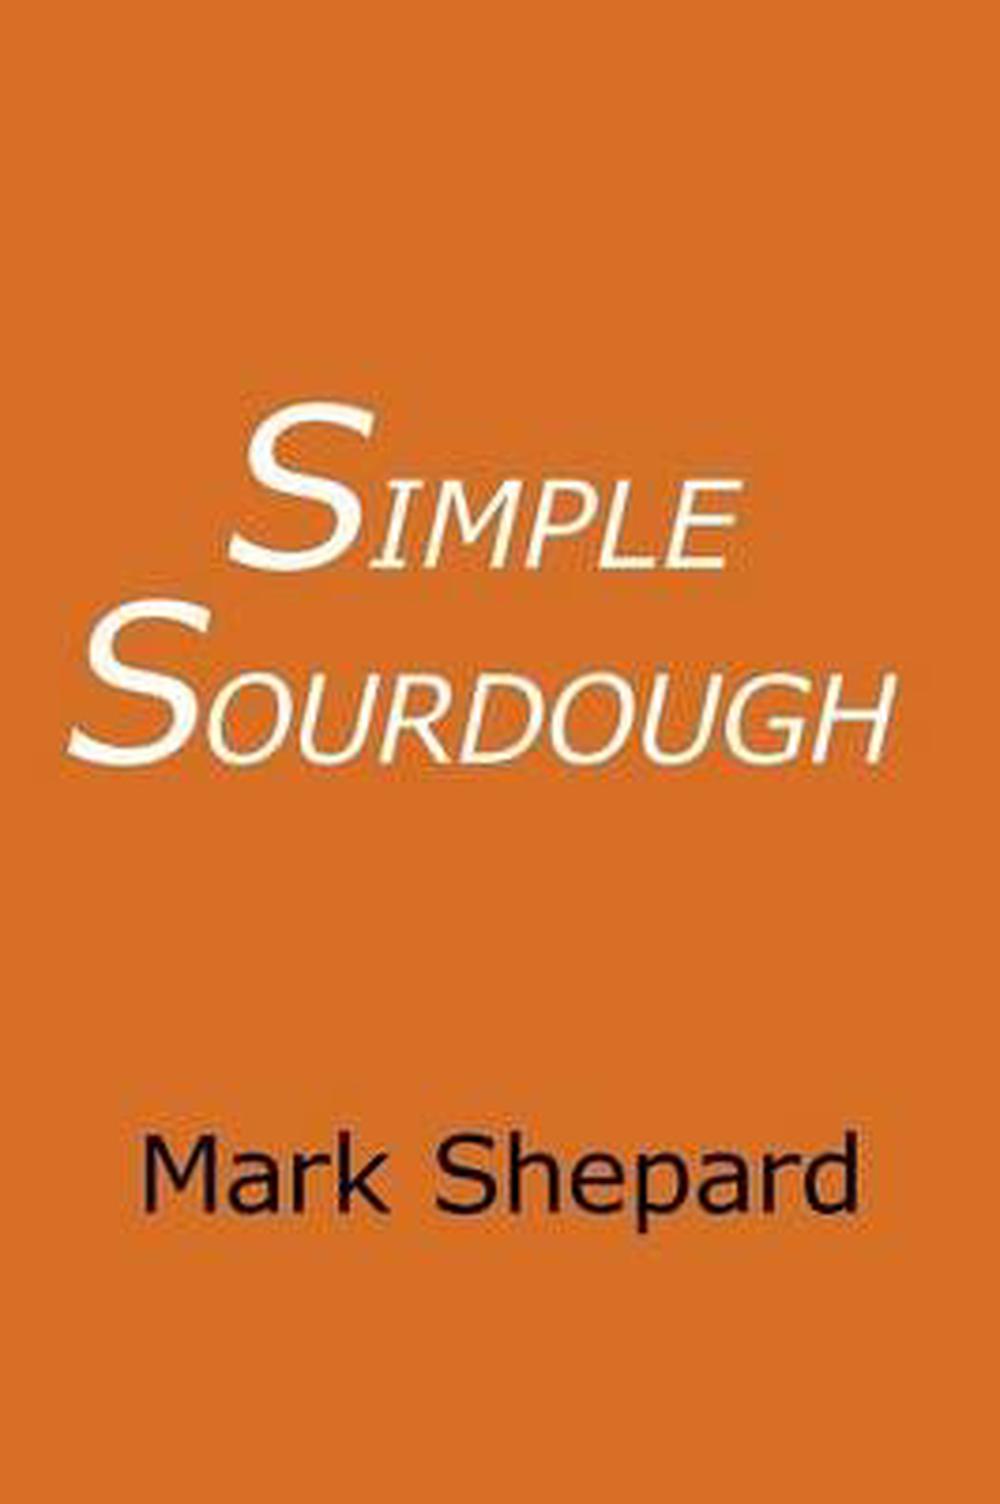 Simple Sourdough Make Your Own Starter Without StoreBought Yeast and Bake the Best Bread in